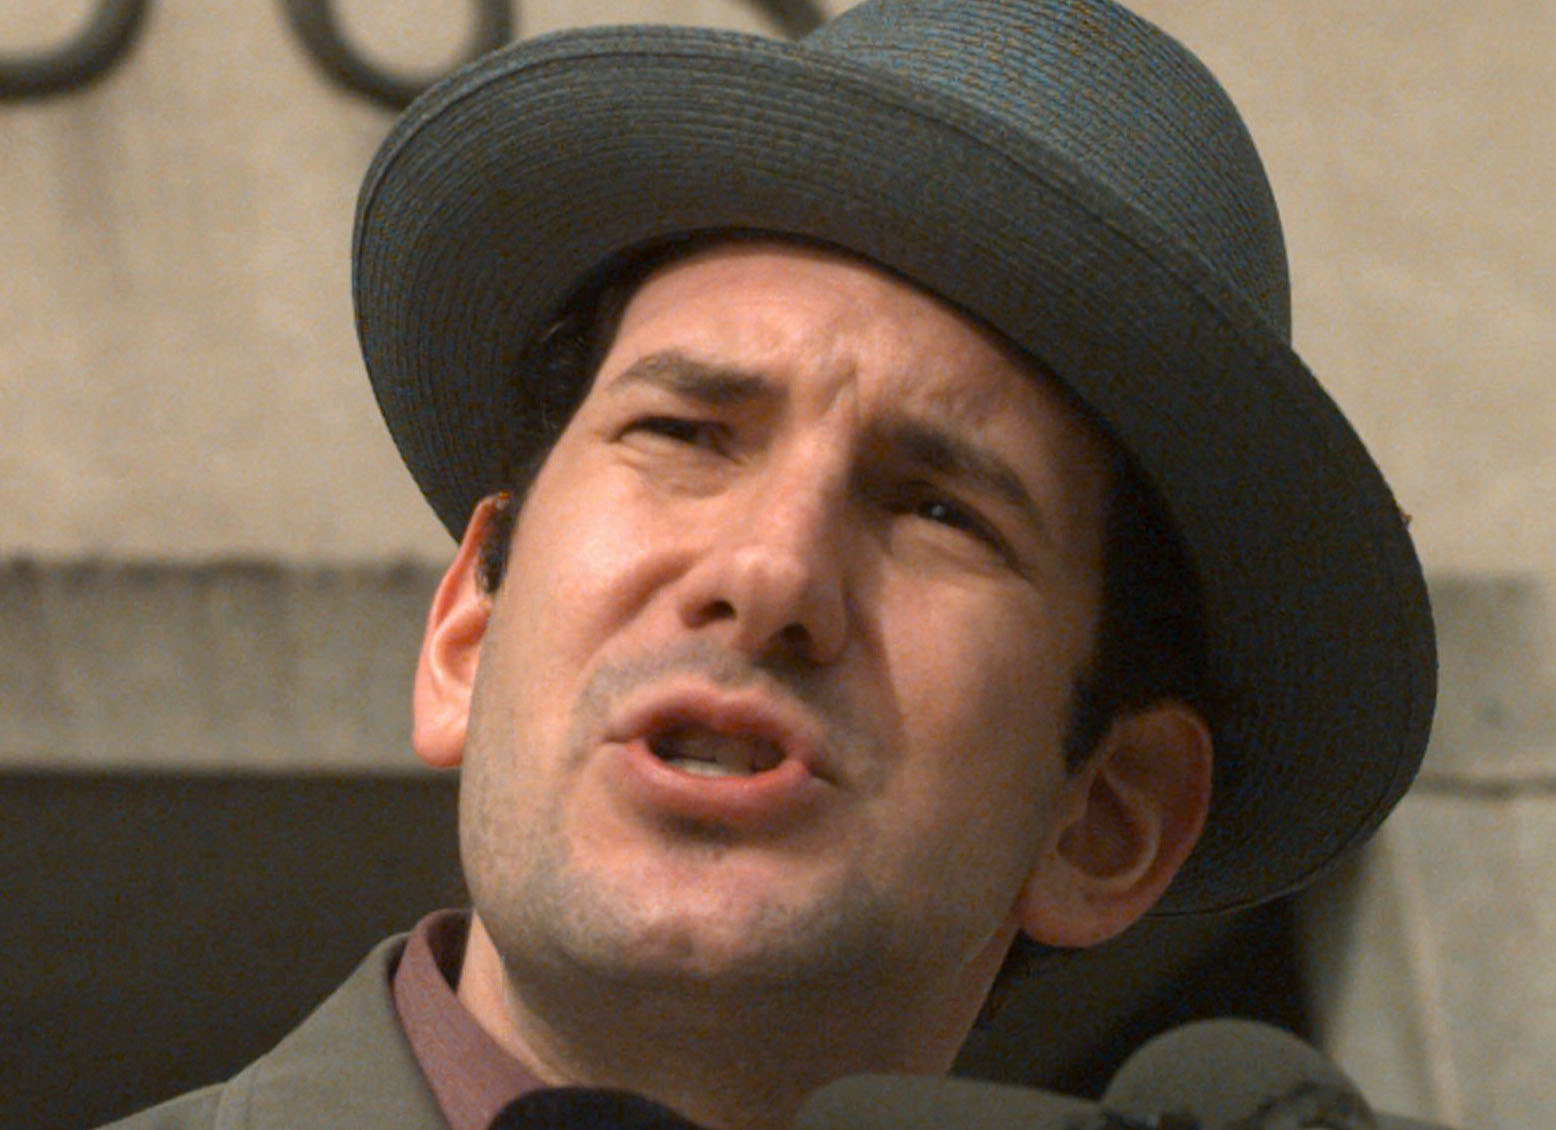 Internet writer Matt Drudge meets reporters outside federal court in Washington on March 11, 1998, after a preliminary hearing on a $30 million defamation suit filed against him by former White House aide Sidney Blumenthal. (AP/Brian K. Diggs)